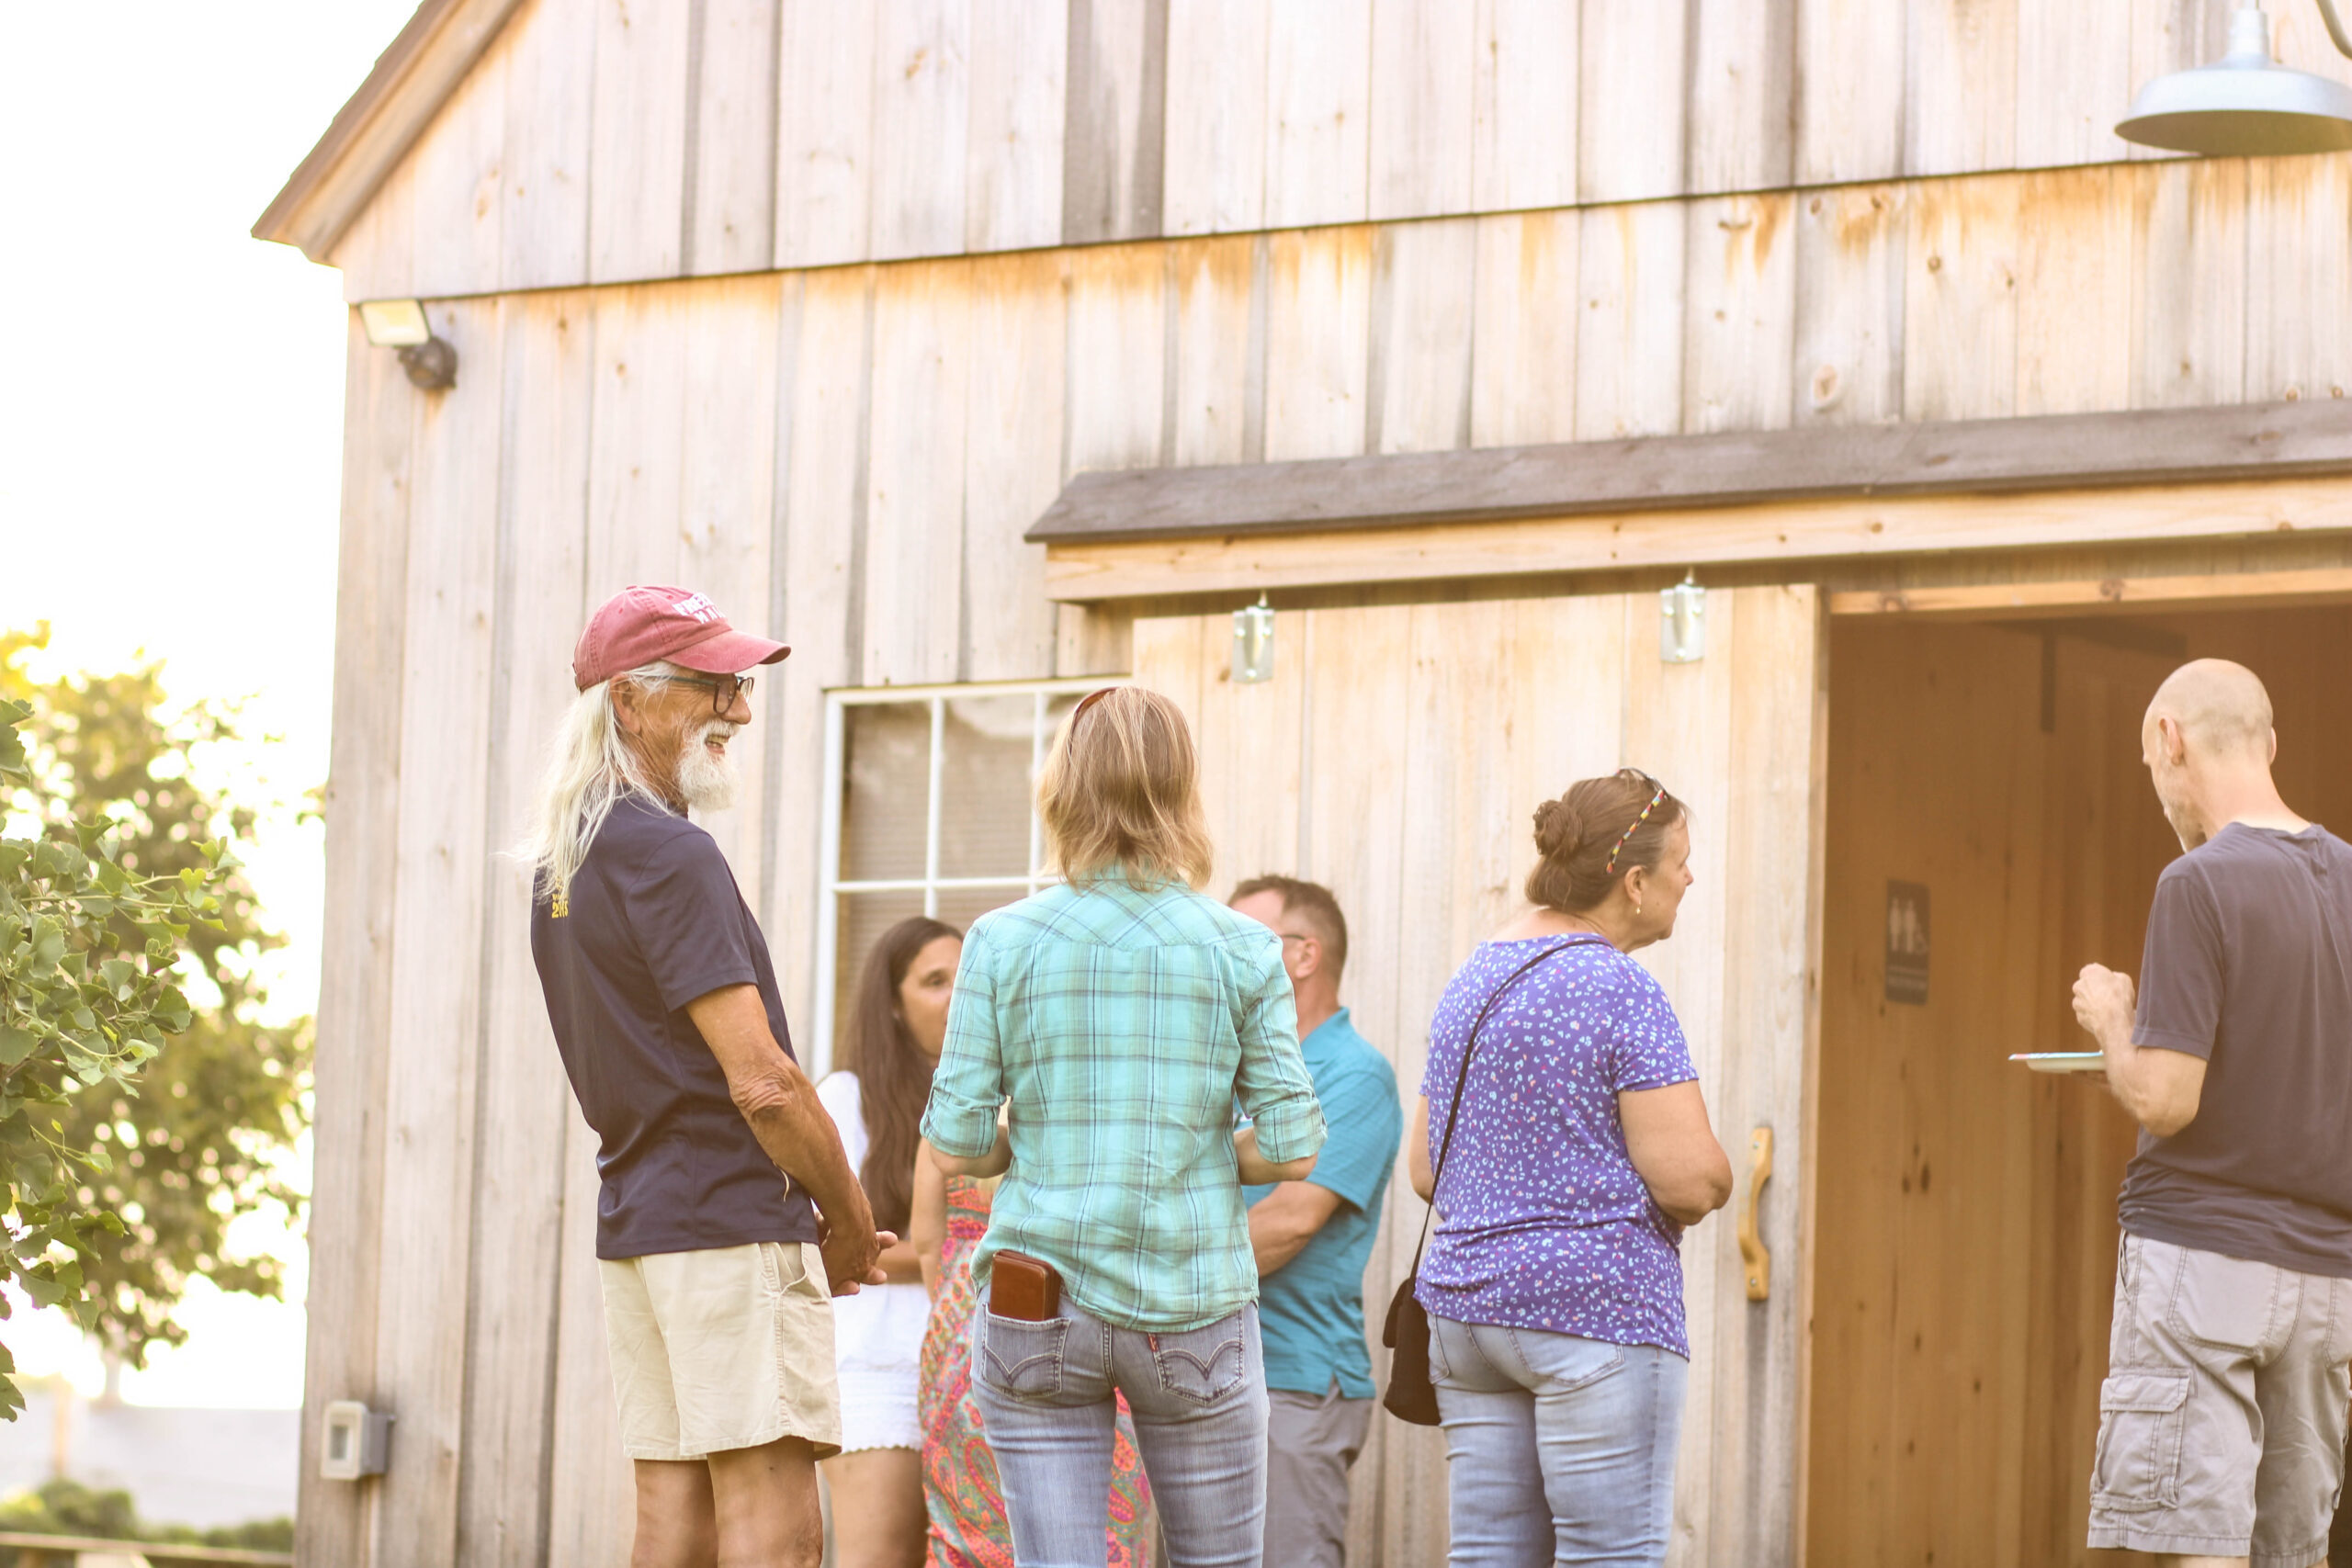 People chatting outside of a barn in the sun